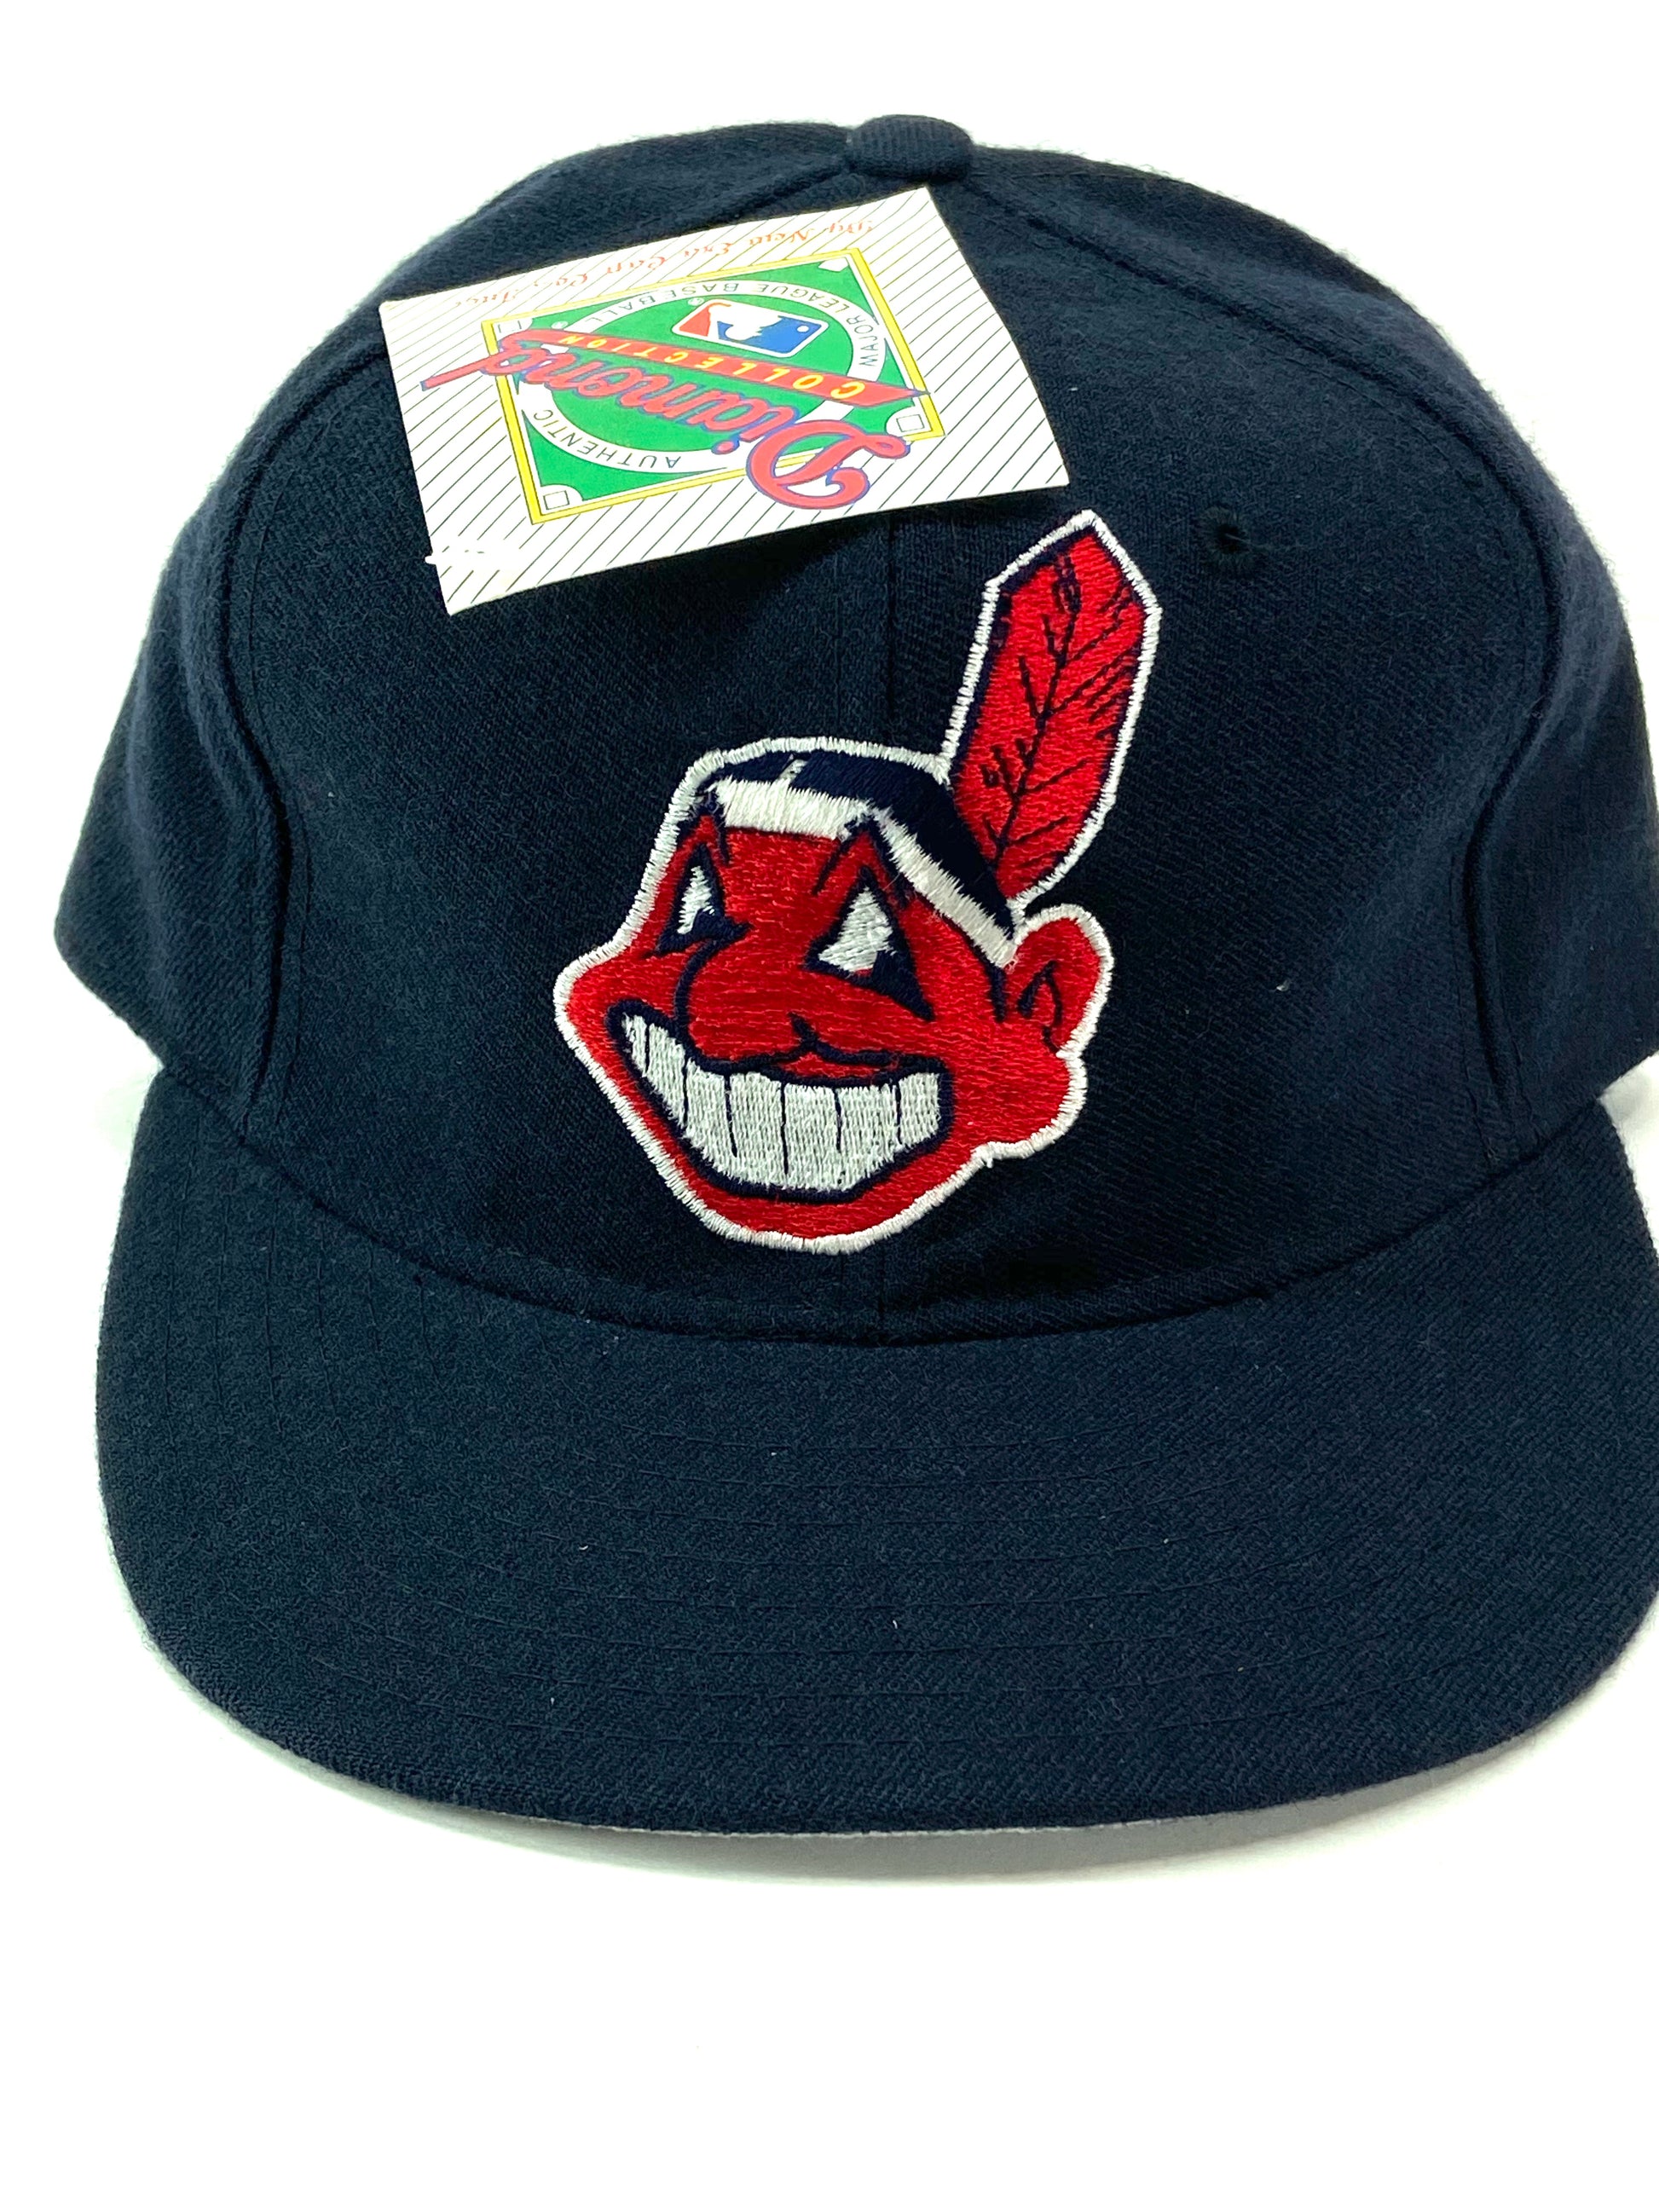 New Era, Accessories, Vintage Dead Stock Nwt 997 Cleveland Indians American  League Champions Hat